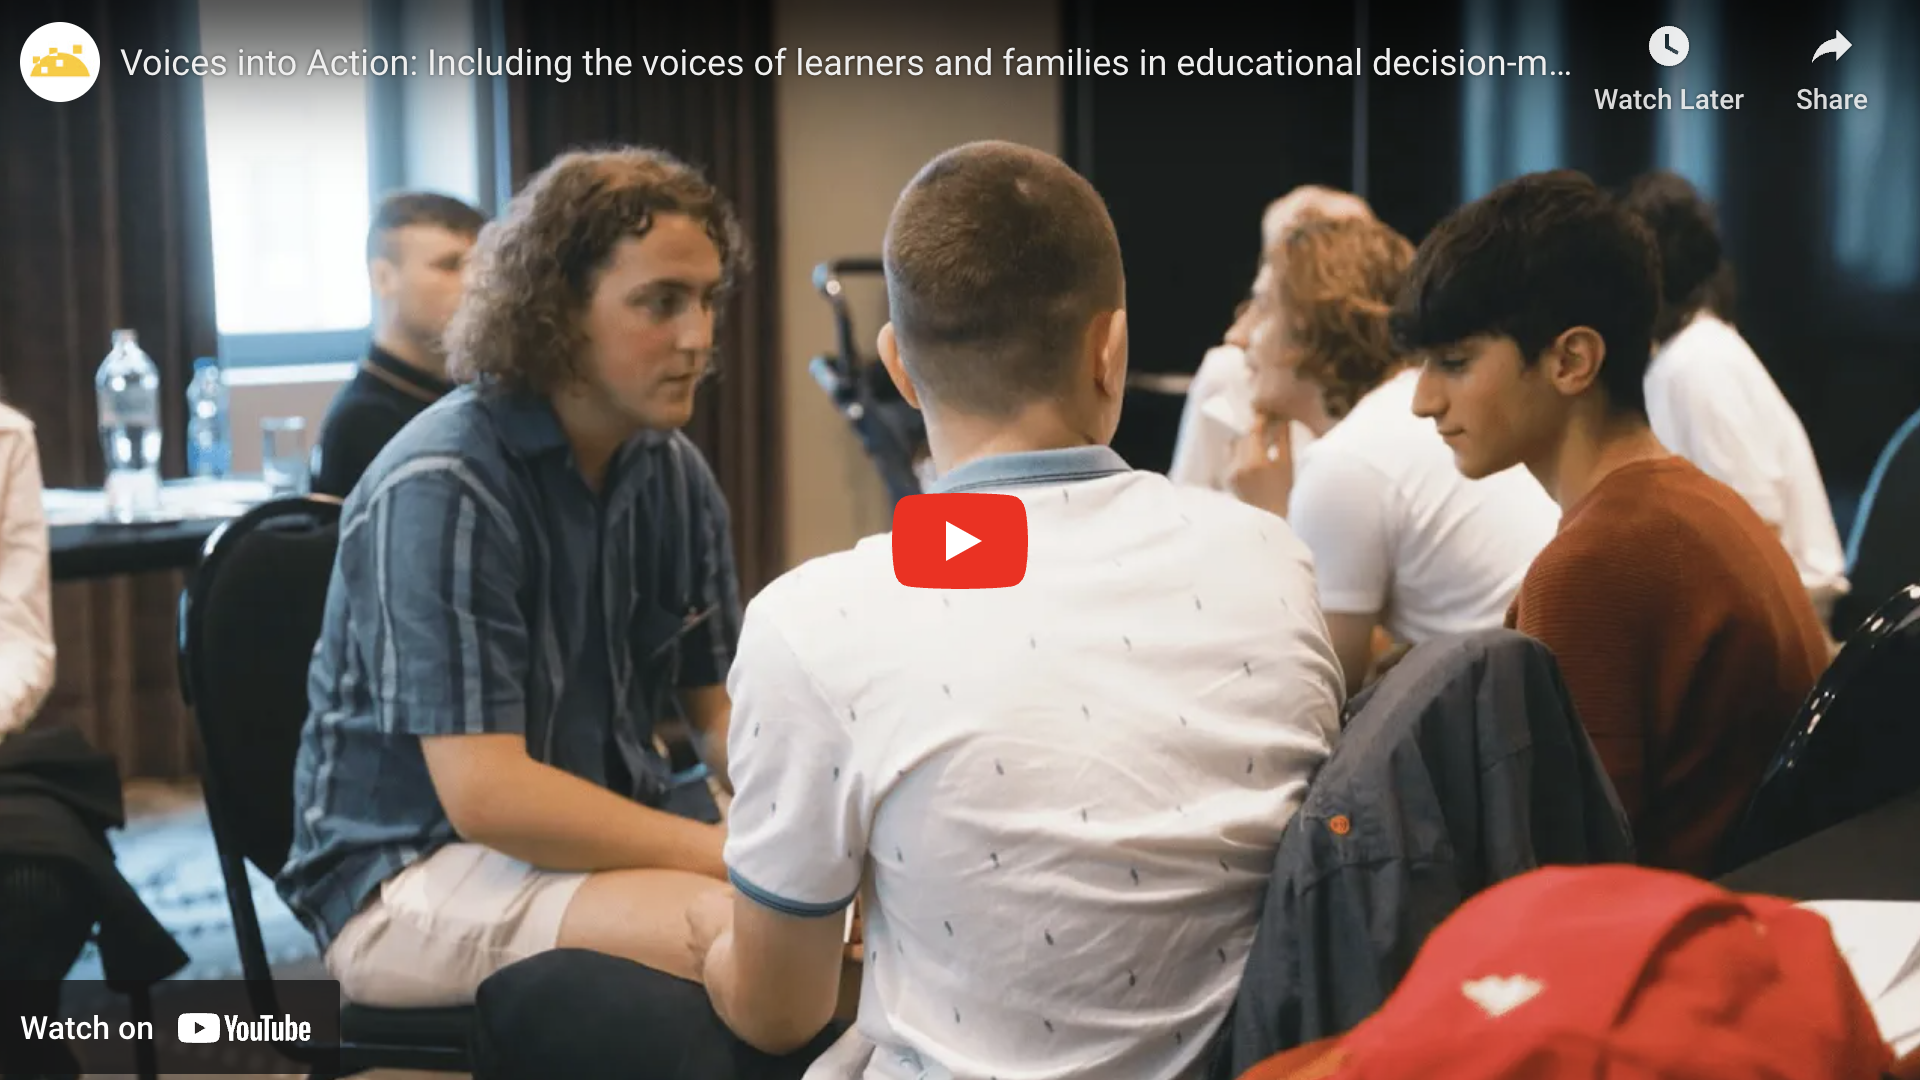 Voices into Action: Including the voices of learners and families in educational decision-making